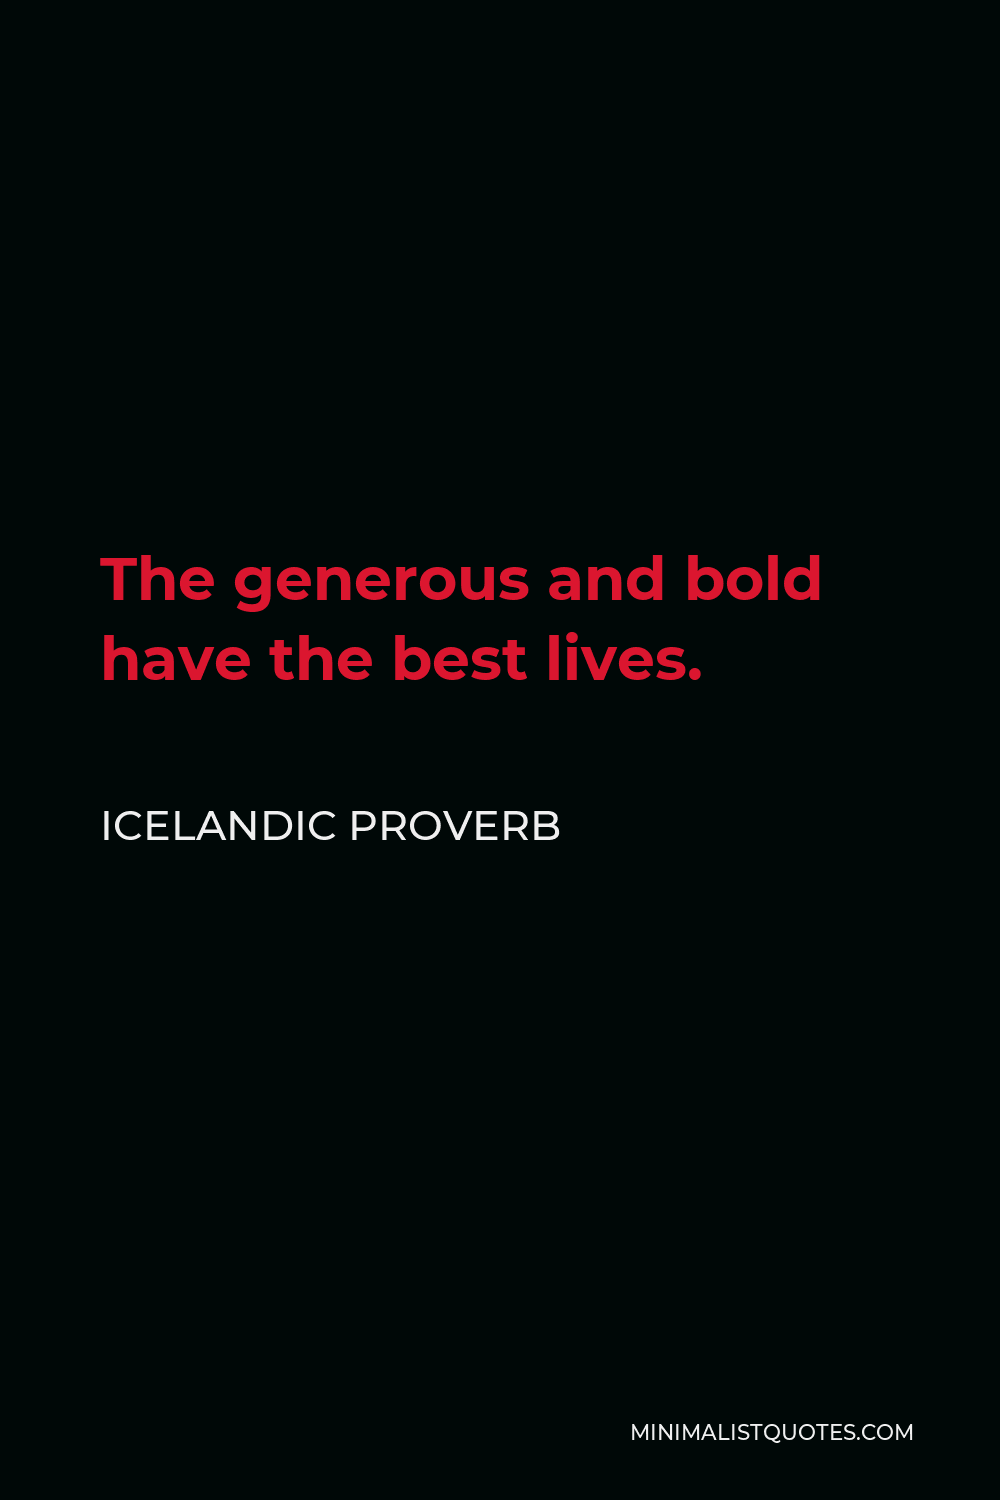 Icelandic Proverb Quote - The generous and bold have the best lives.